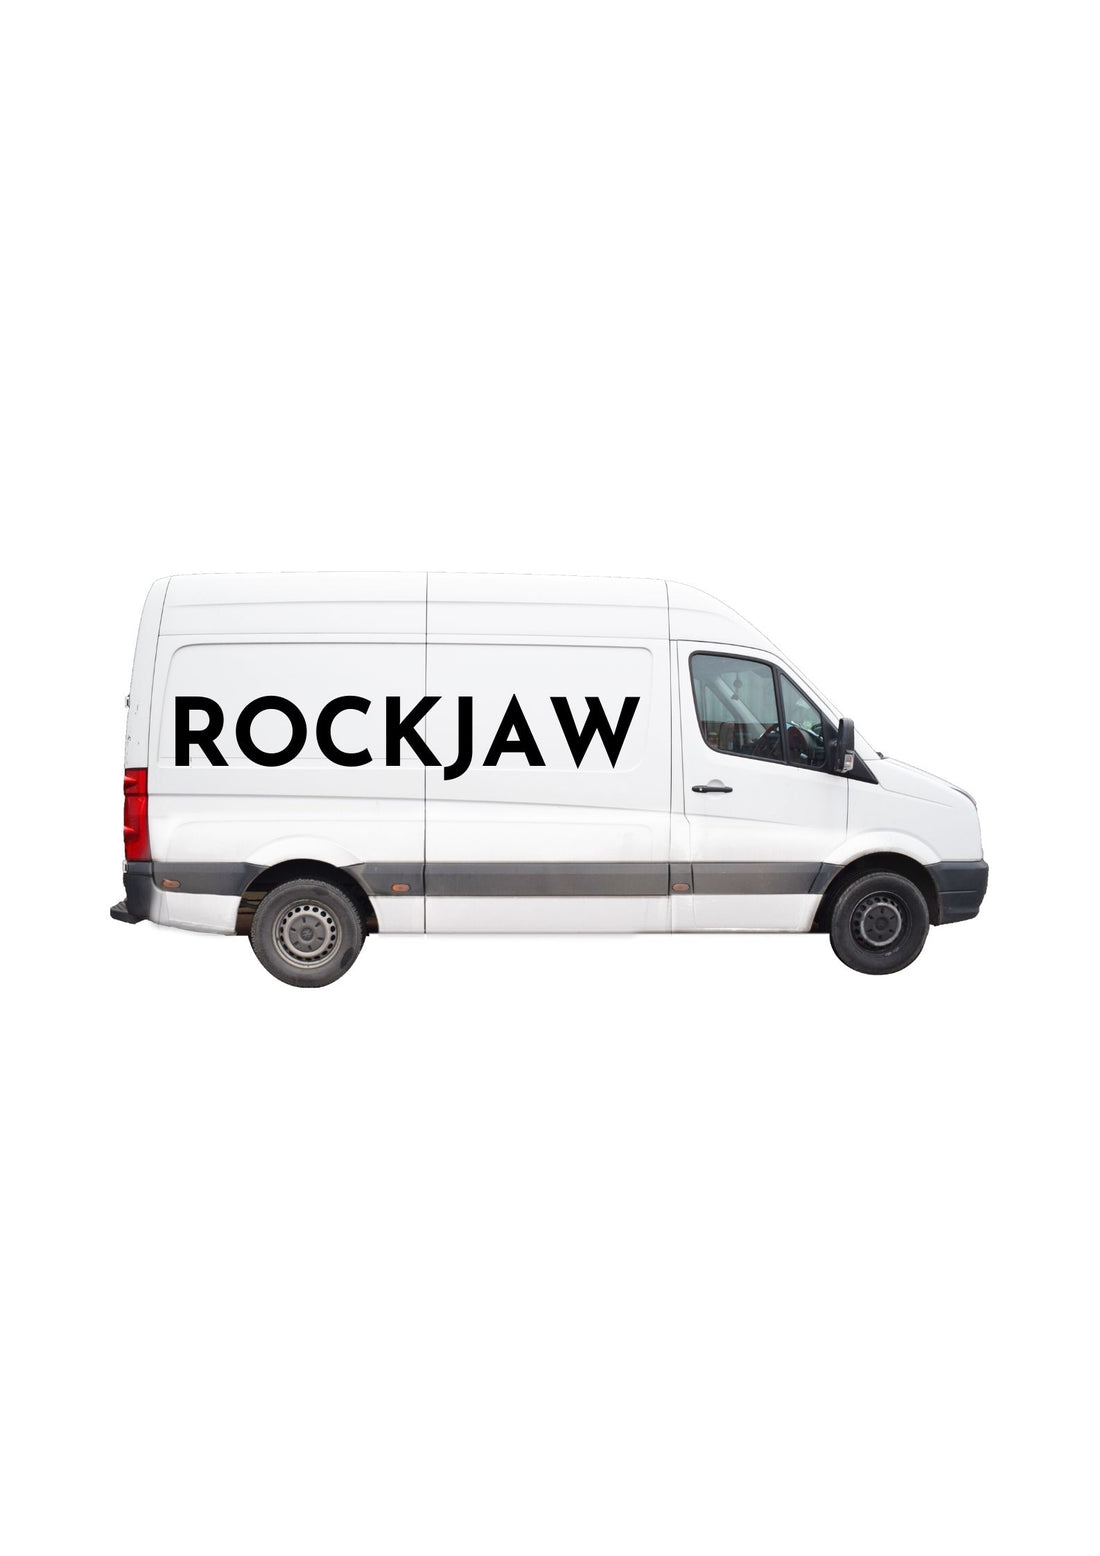 Where is my ROCKJAW? SHIPPING UPDATE